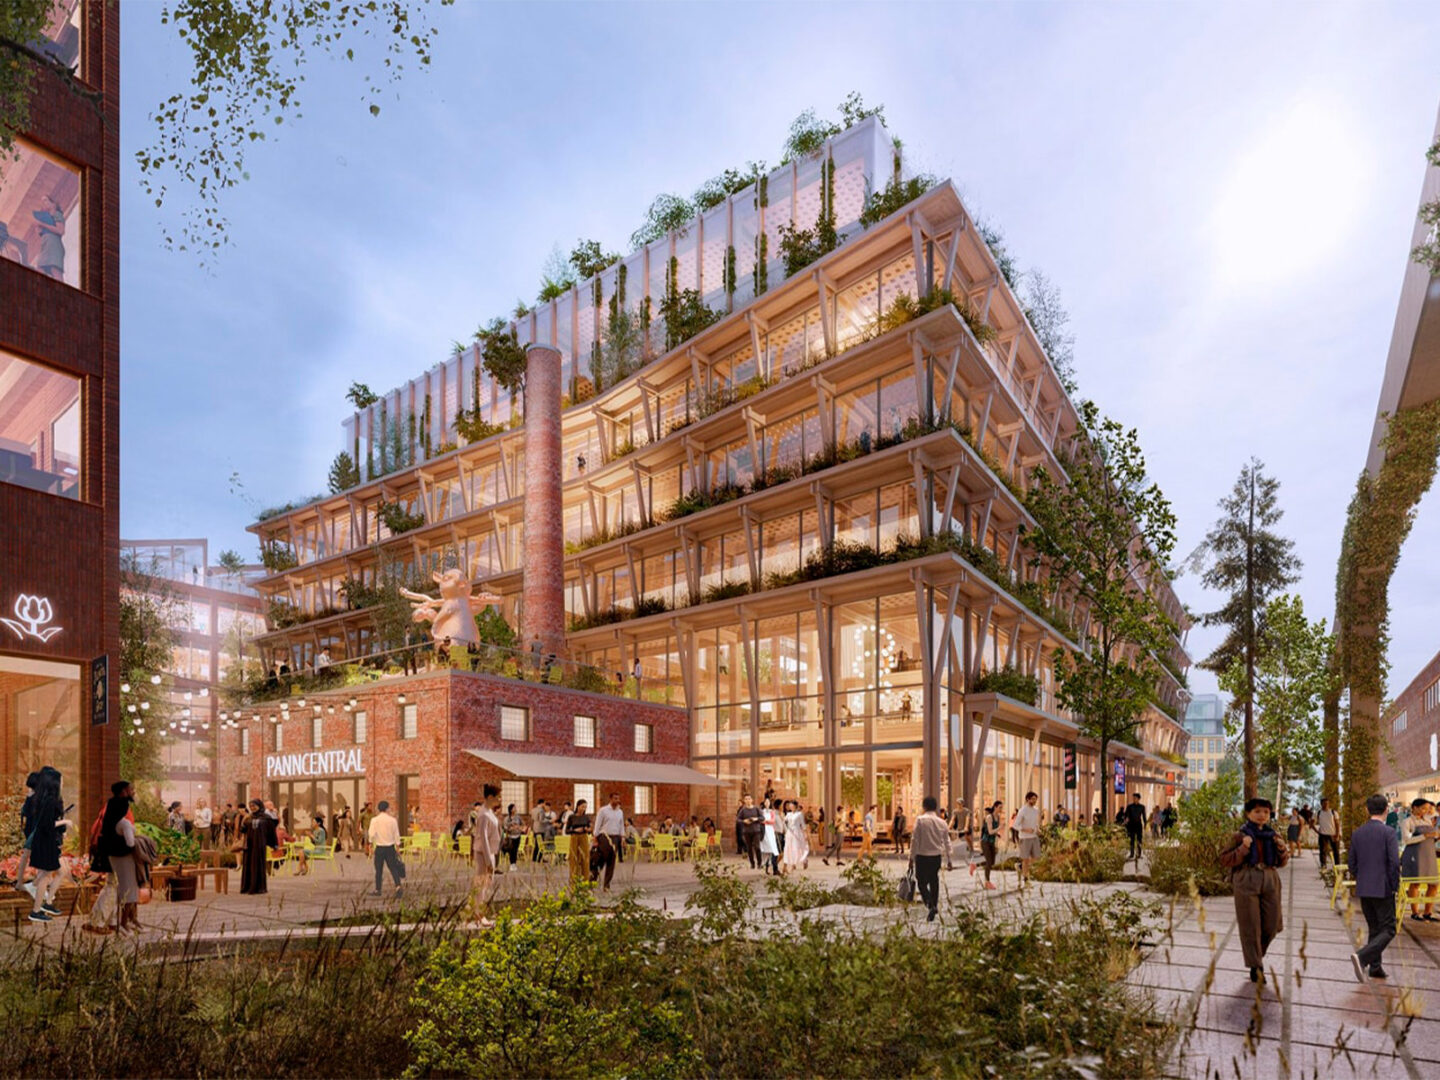 Sweden to build the world’s largest wooden city